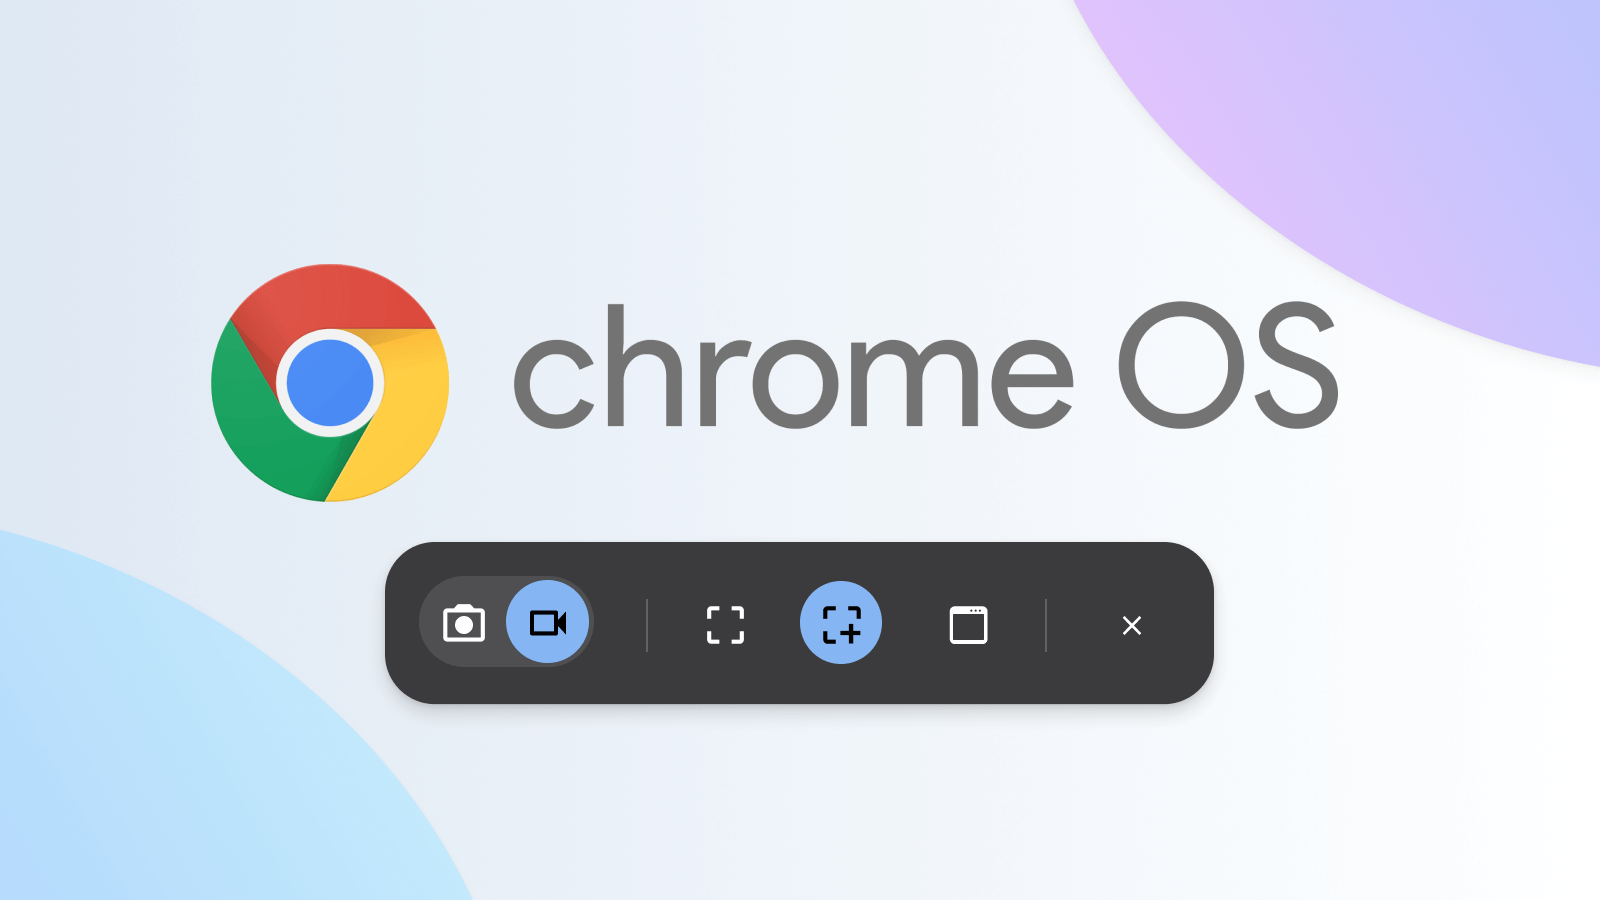 The ChromeOS logo with icons for the screen capture feature